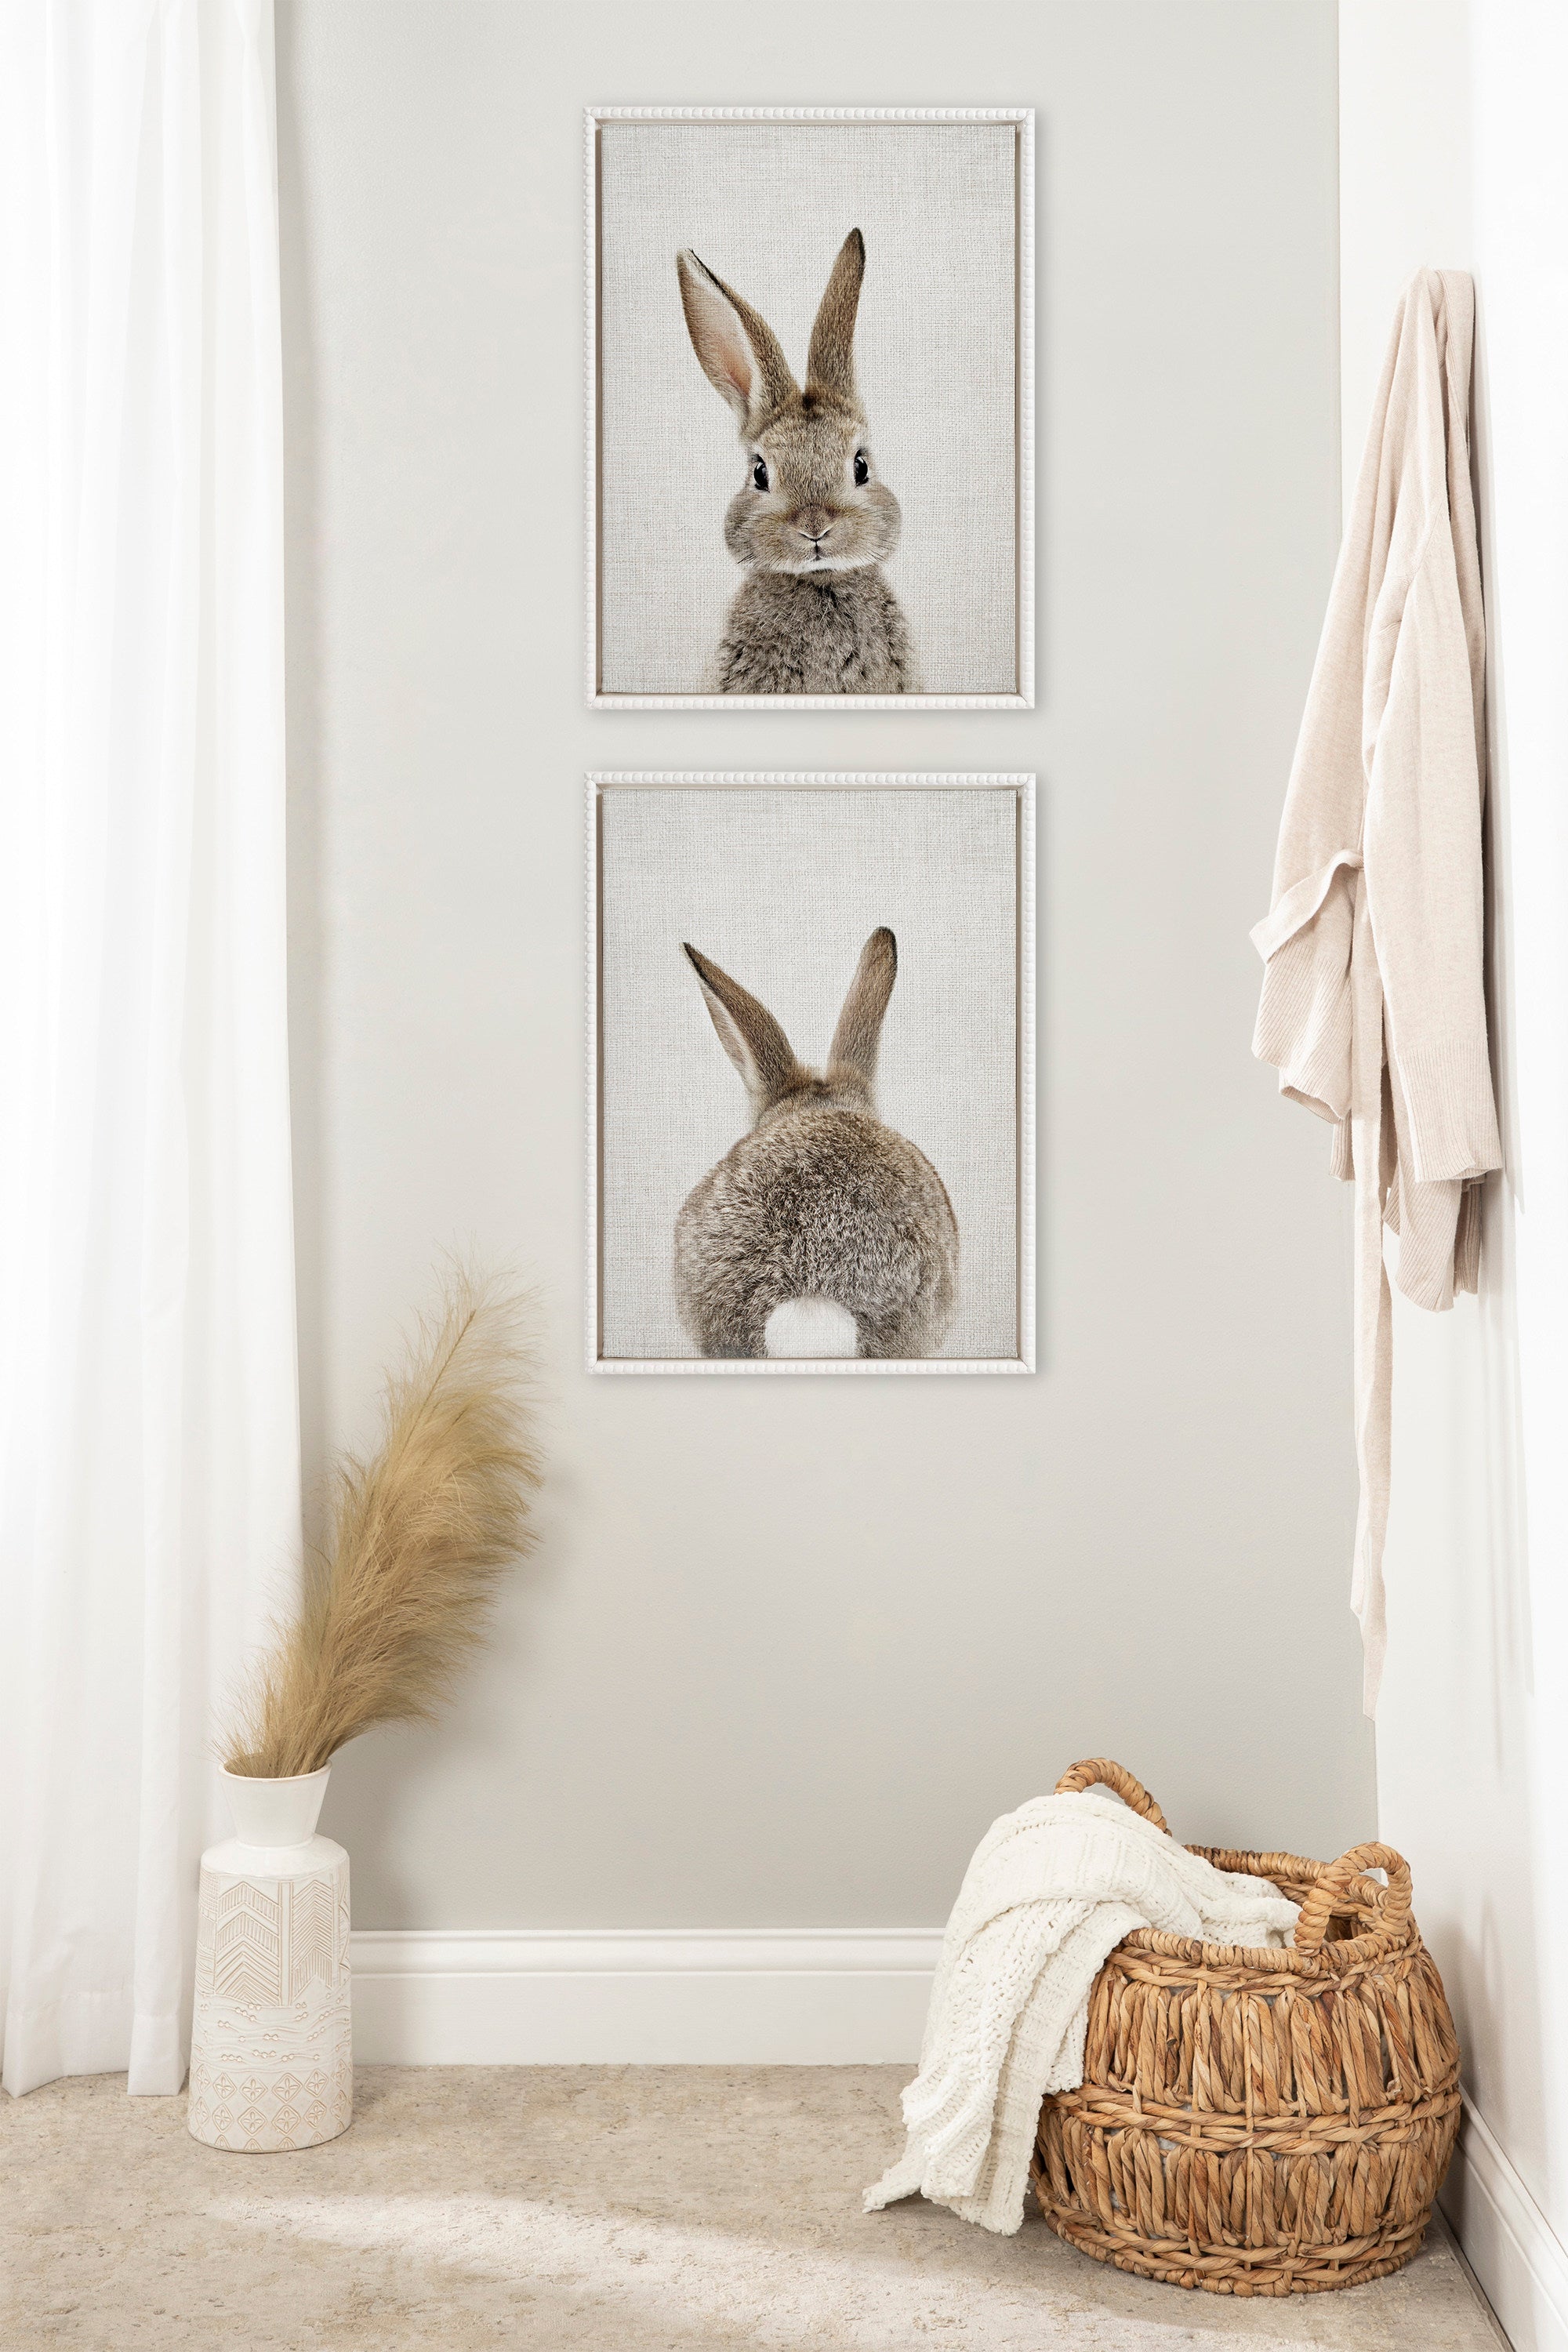 Sylvie Beaded Bunny Portrait on Linen and Bunny Tail on Linen Framed Canvas Art Set by Amy Peterson